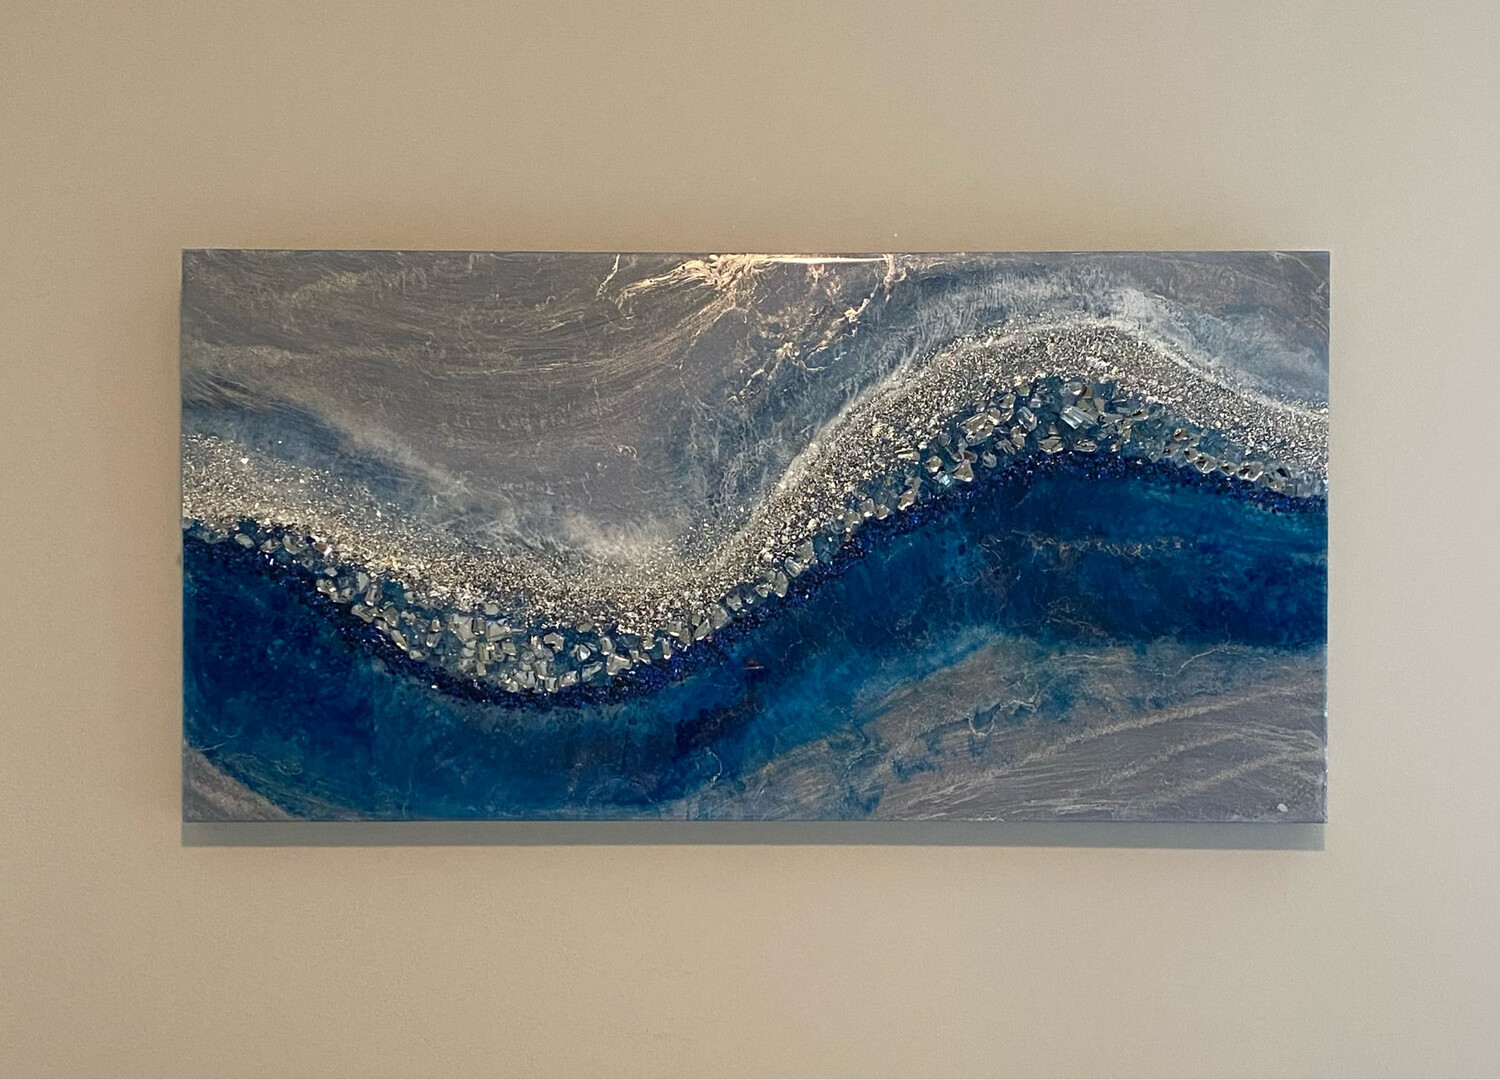 Mystique, 36”x24” Resin & Crushed Glass